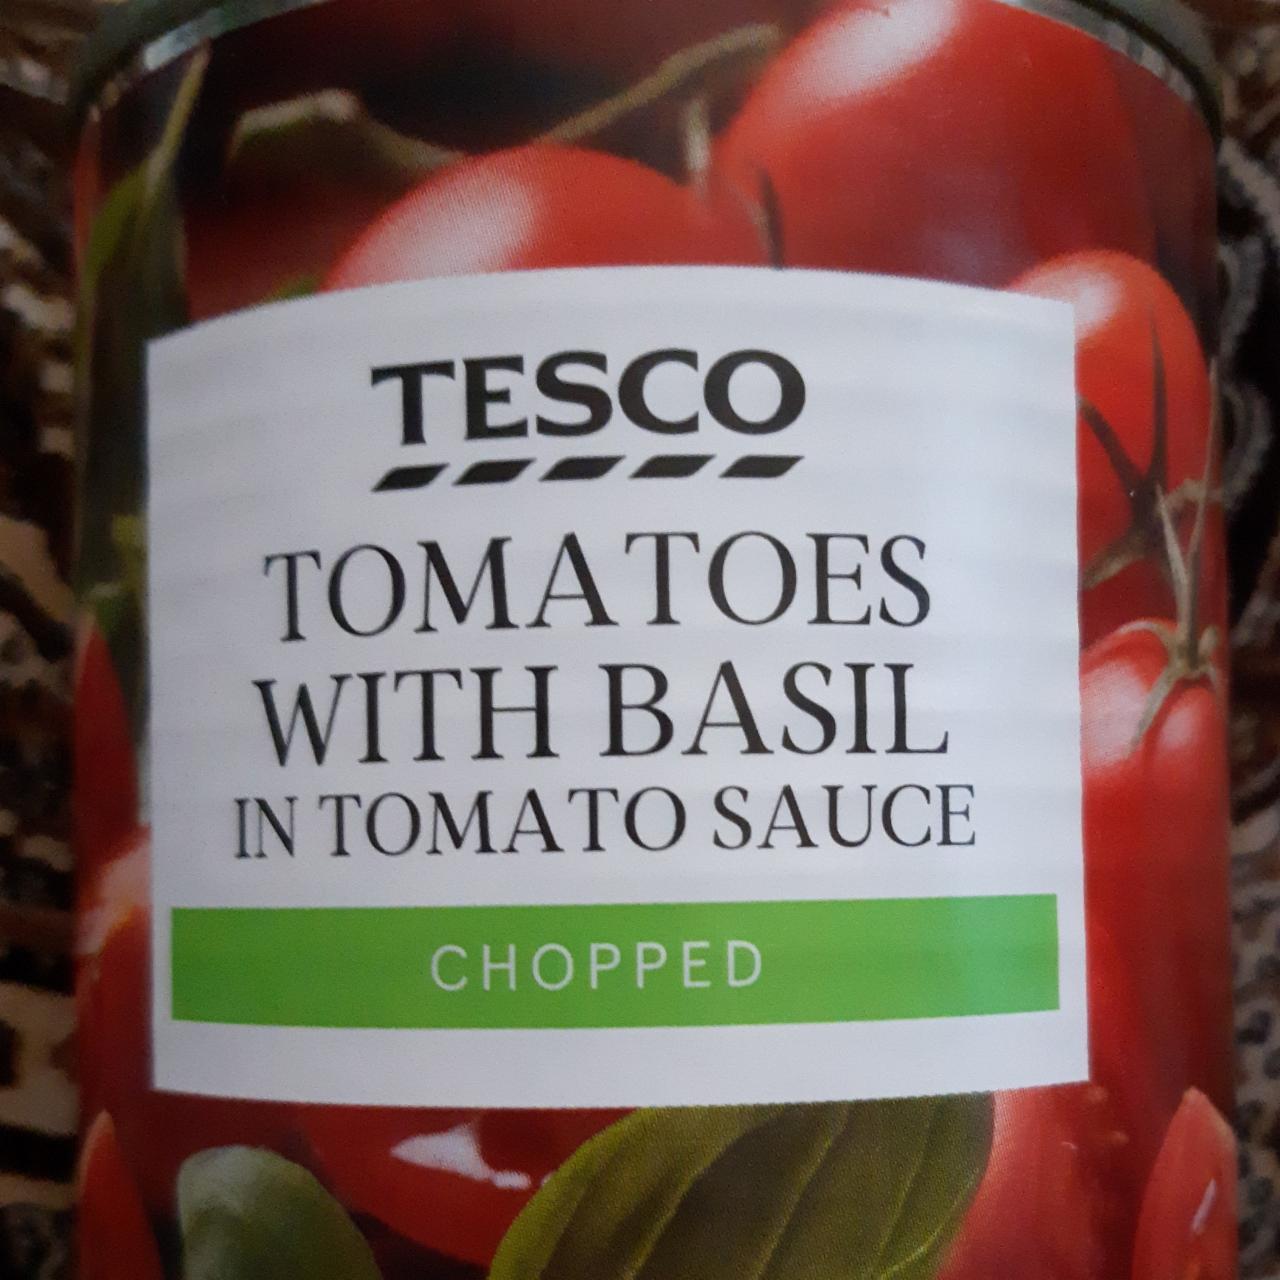 Képek - Tomatoes with basil in tomato sauce chopped Tesco